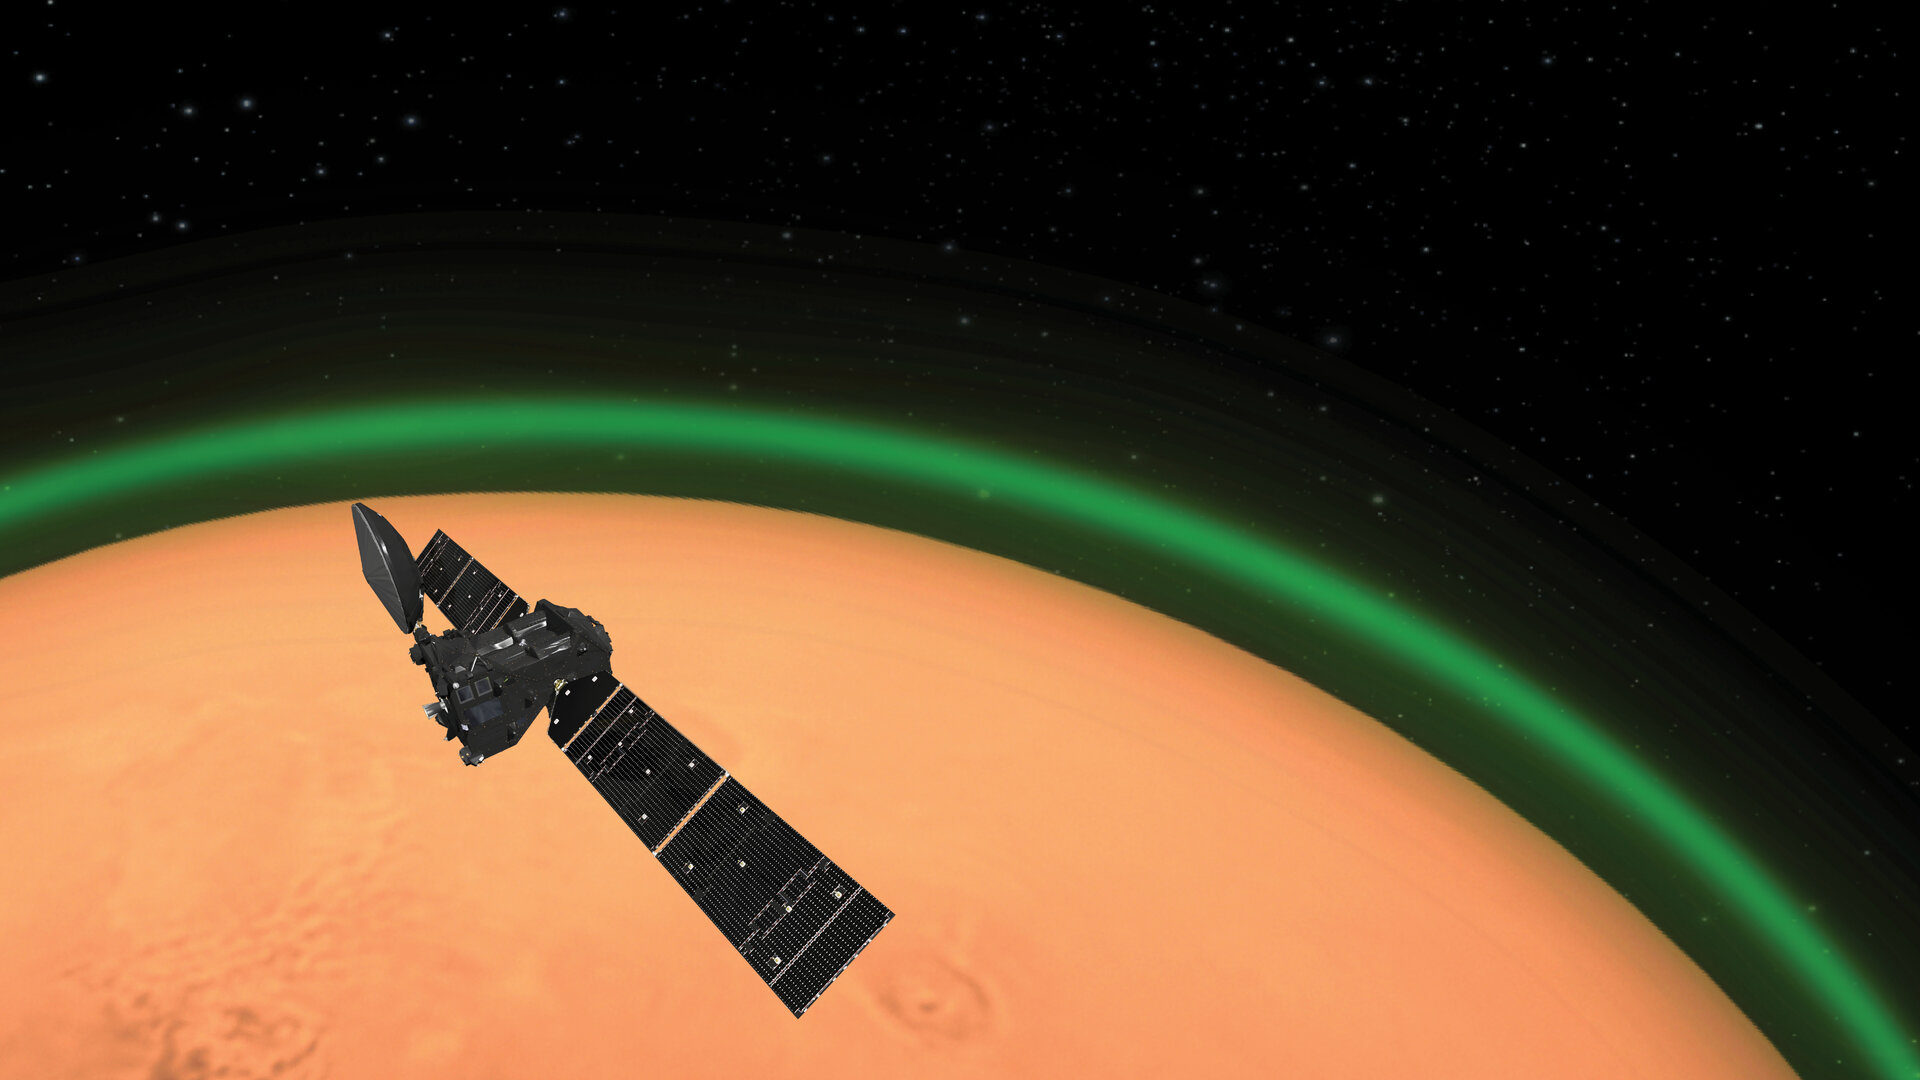 ESA ExoMars sees first-ever Martian green glow